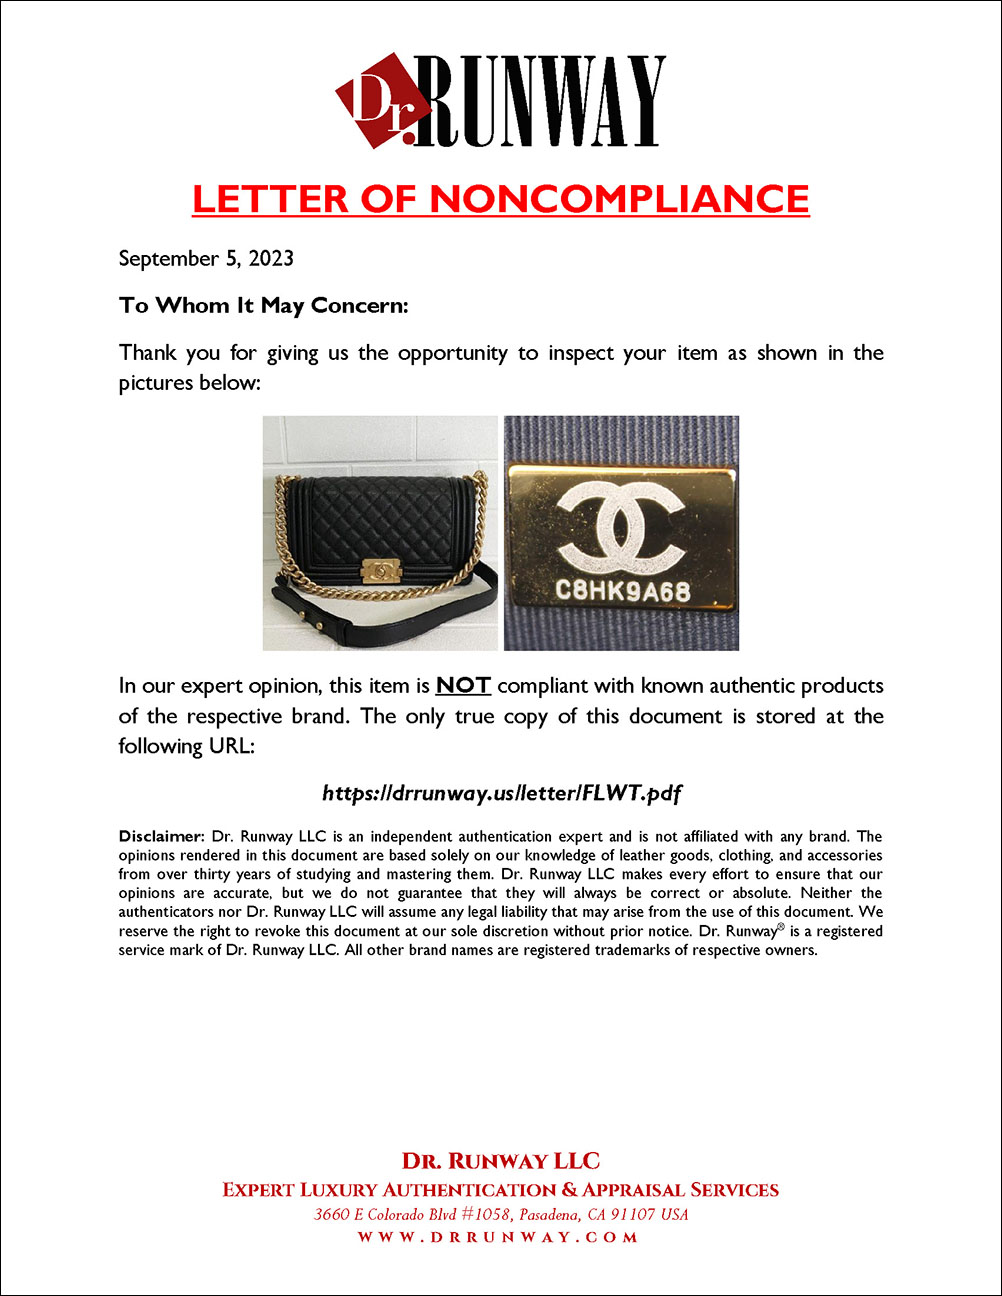 Louis Vuitton/Chanel Authentication service by Real Authentication